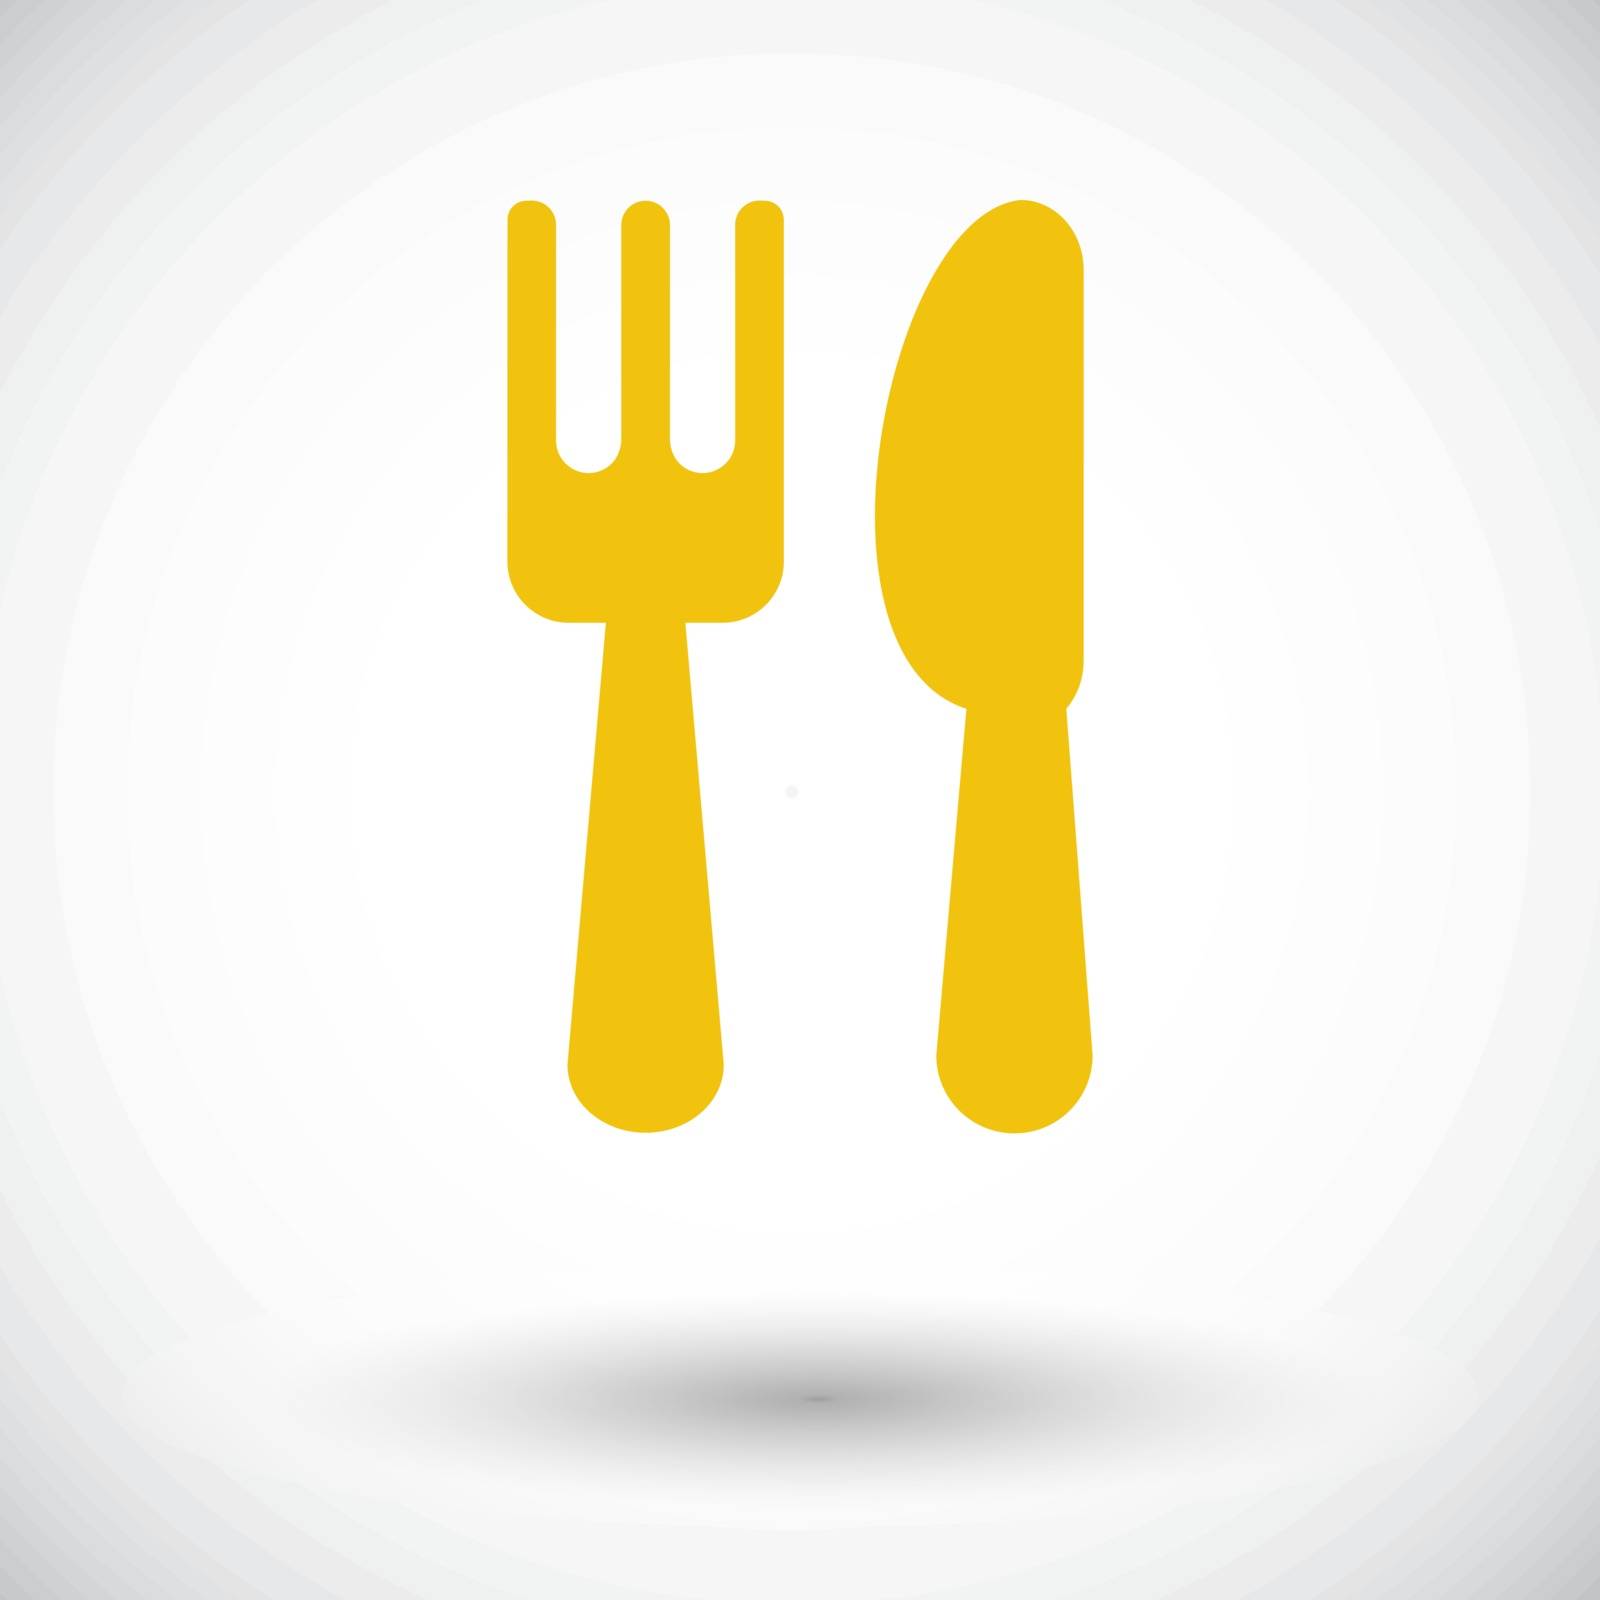 Cutlery. Single flat icon on white background. Vector illustration.